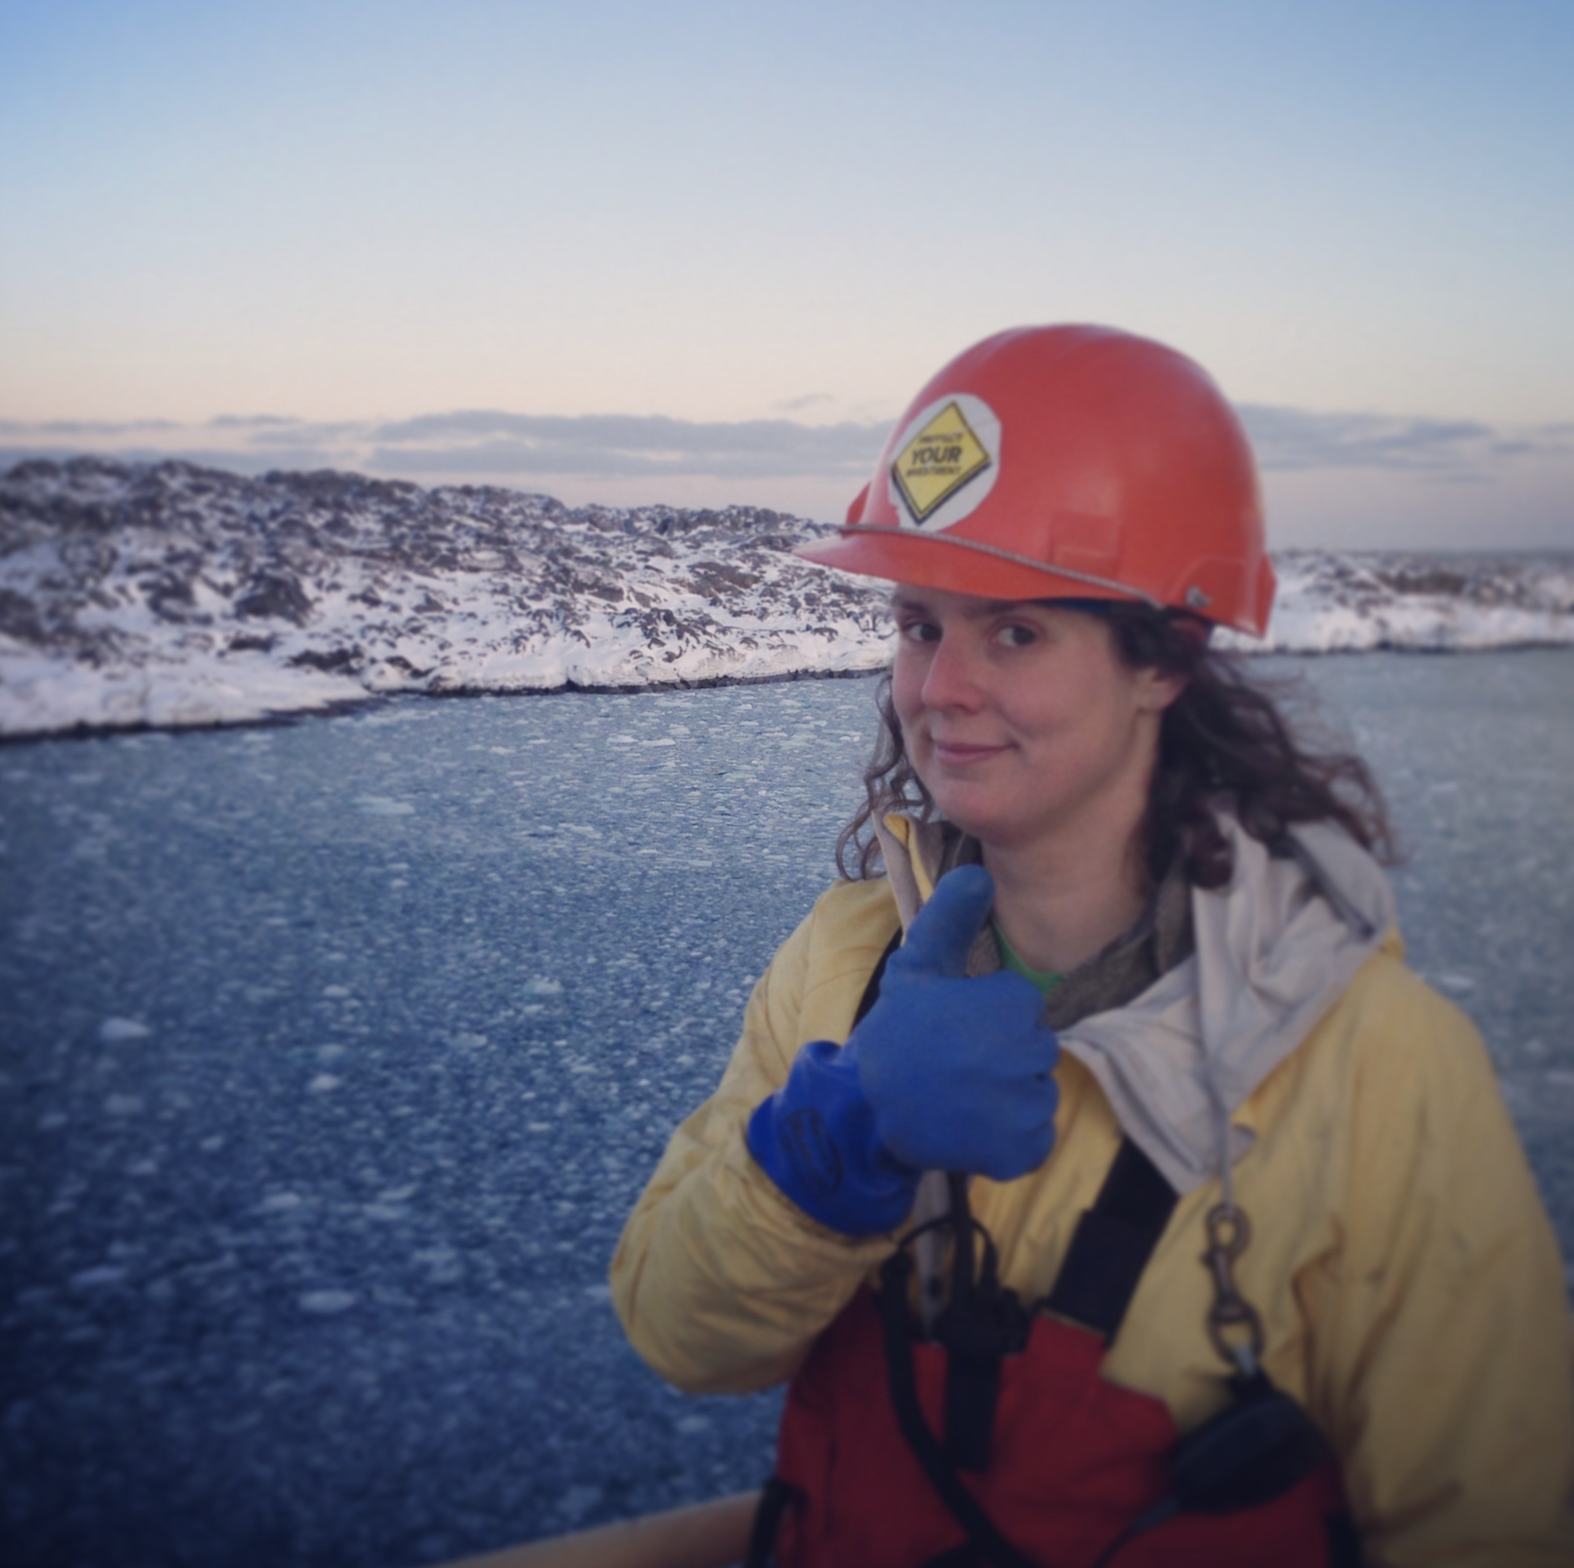 Jamee Johnson pictured wearing a hard hat on a vessel in Antarctica, looking at the camera and showing a thumbs up with a gloved hand